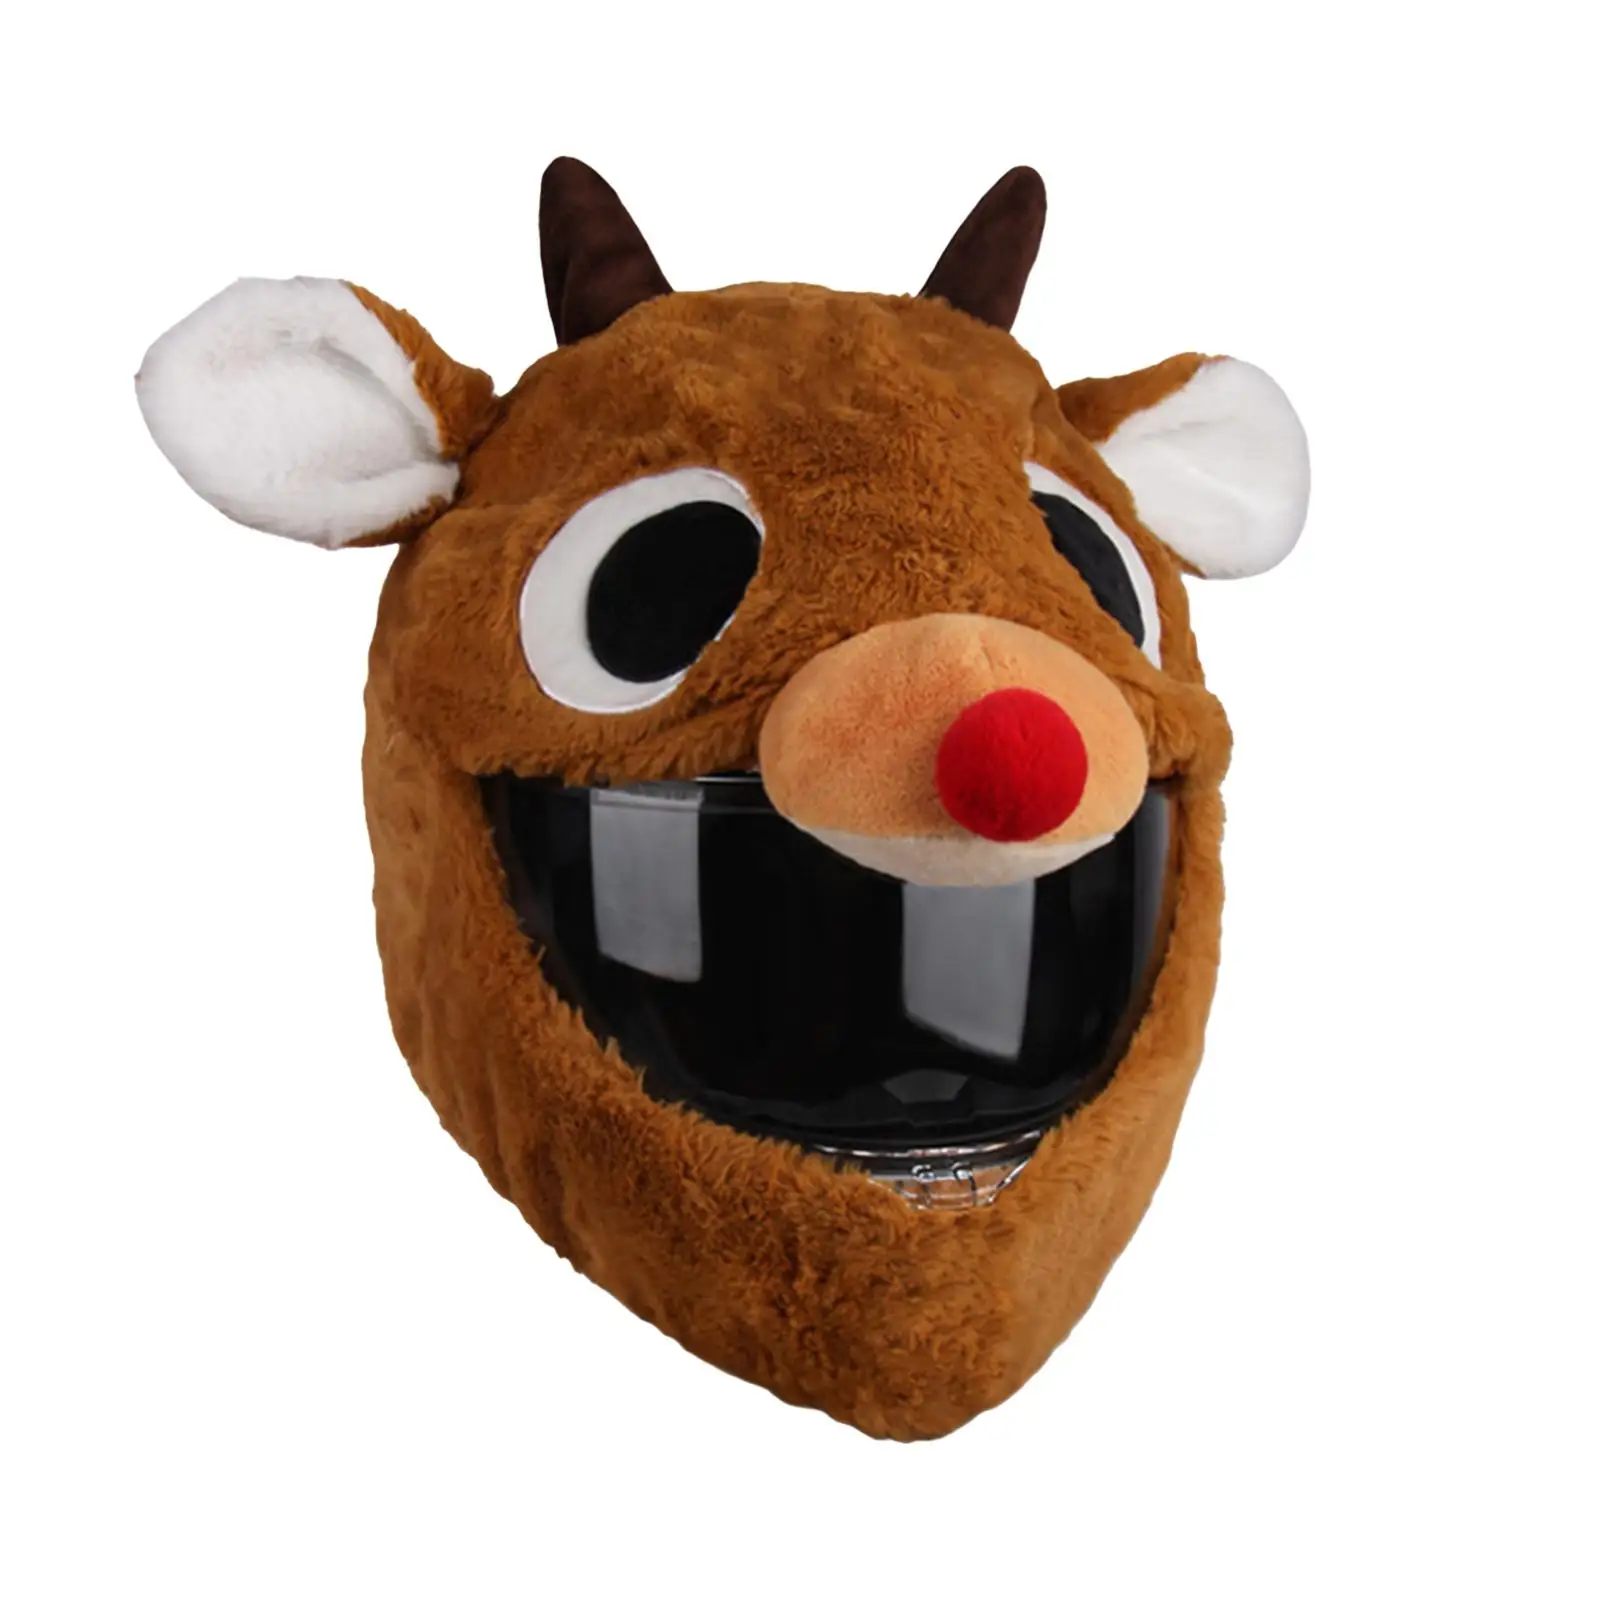 Helmet Cover Reindeer Shaped Plush Eye Catching Style Adorable Cutie Increase Riding Fun Universal Motorbike Funny Helmet Cover